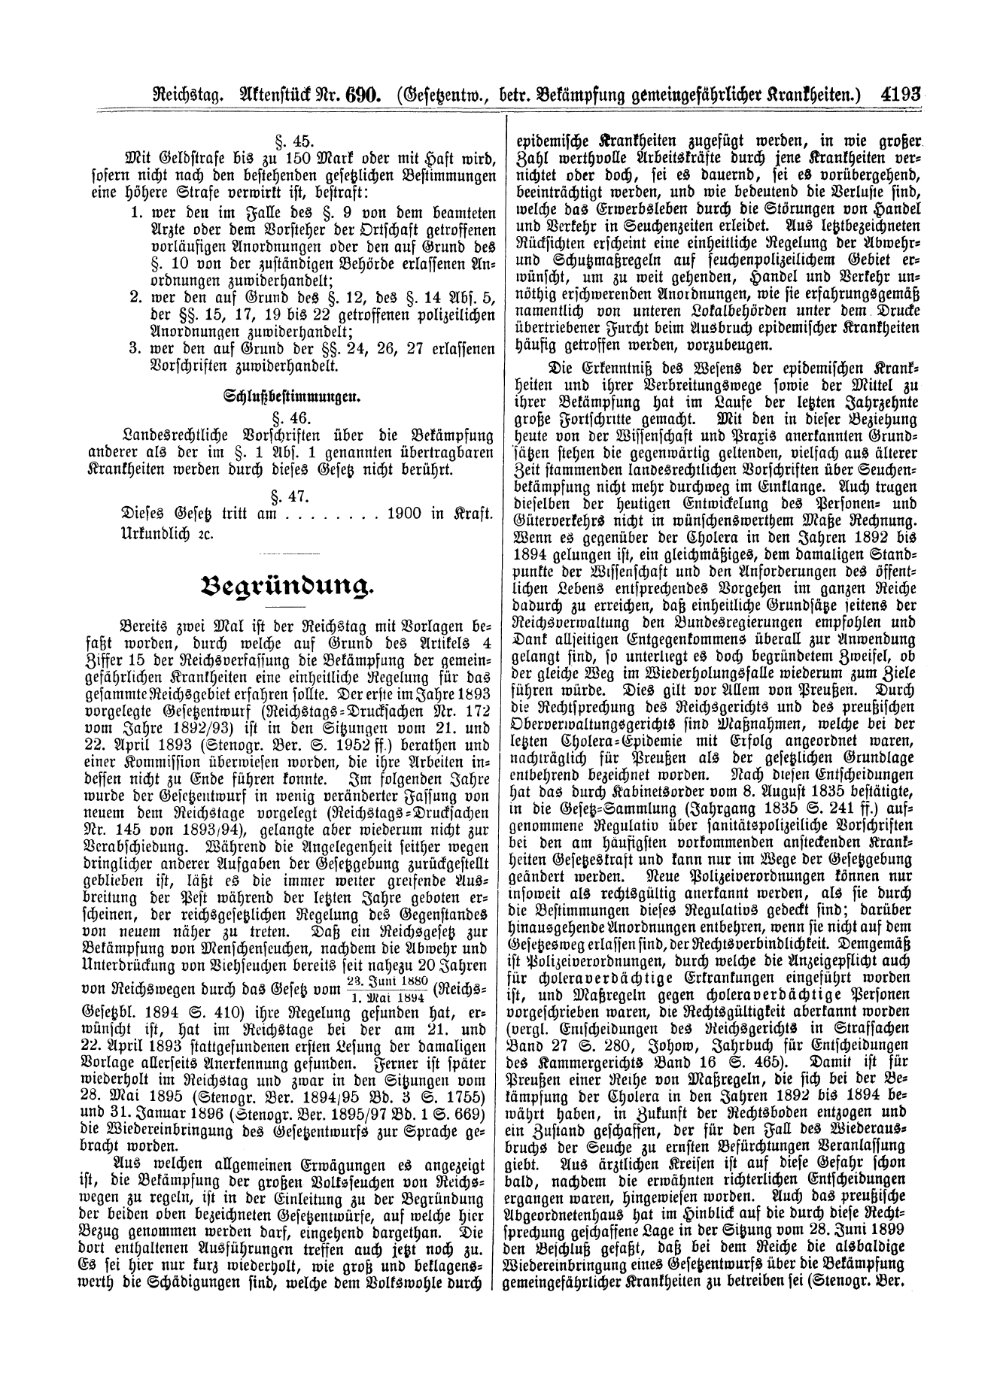 Scan of page 4193